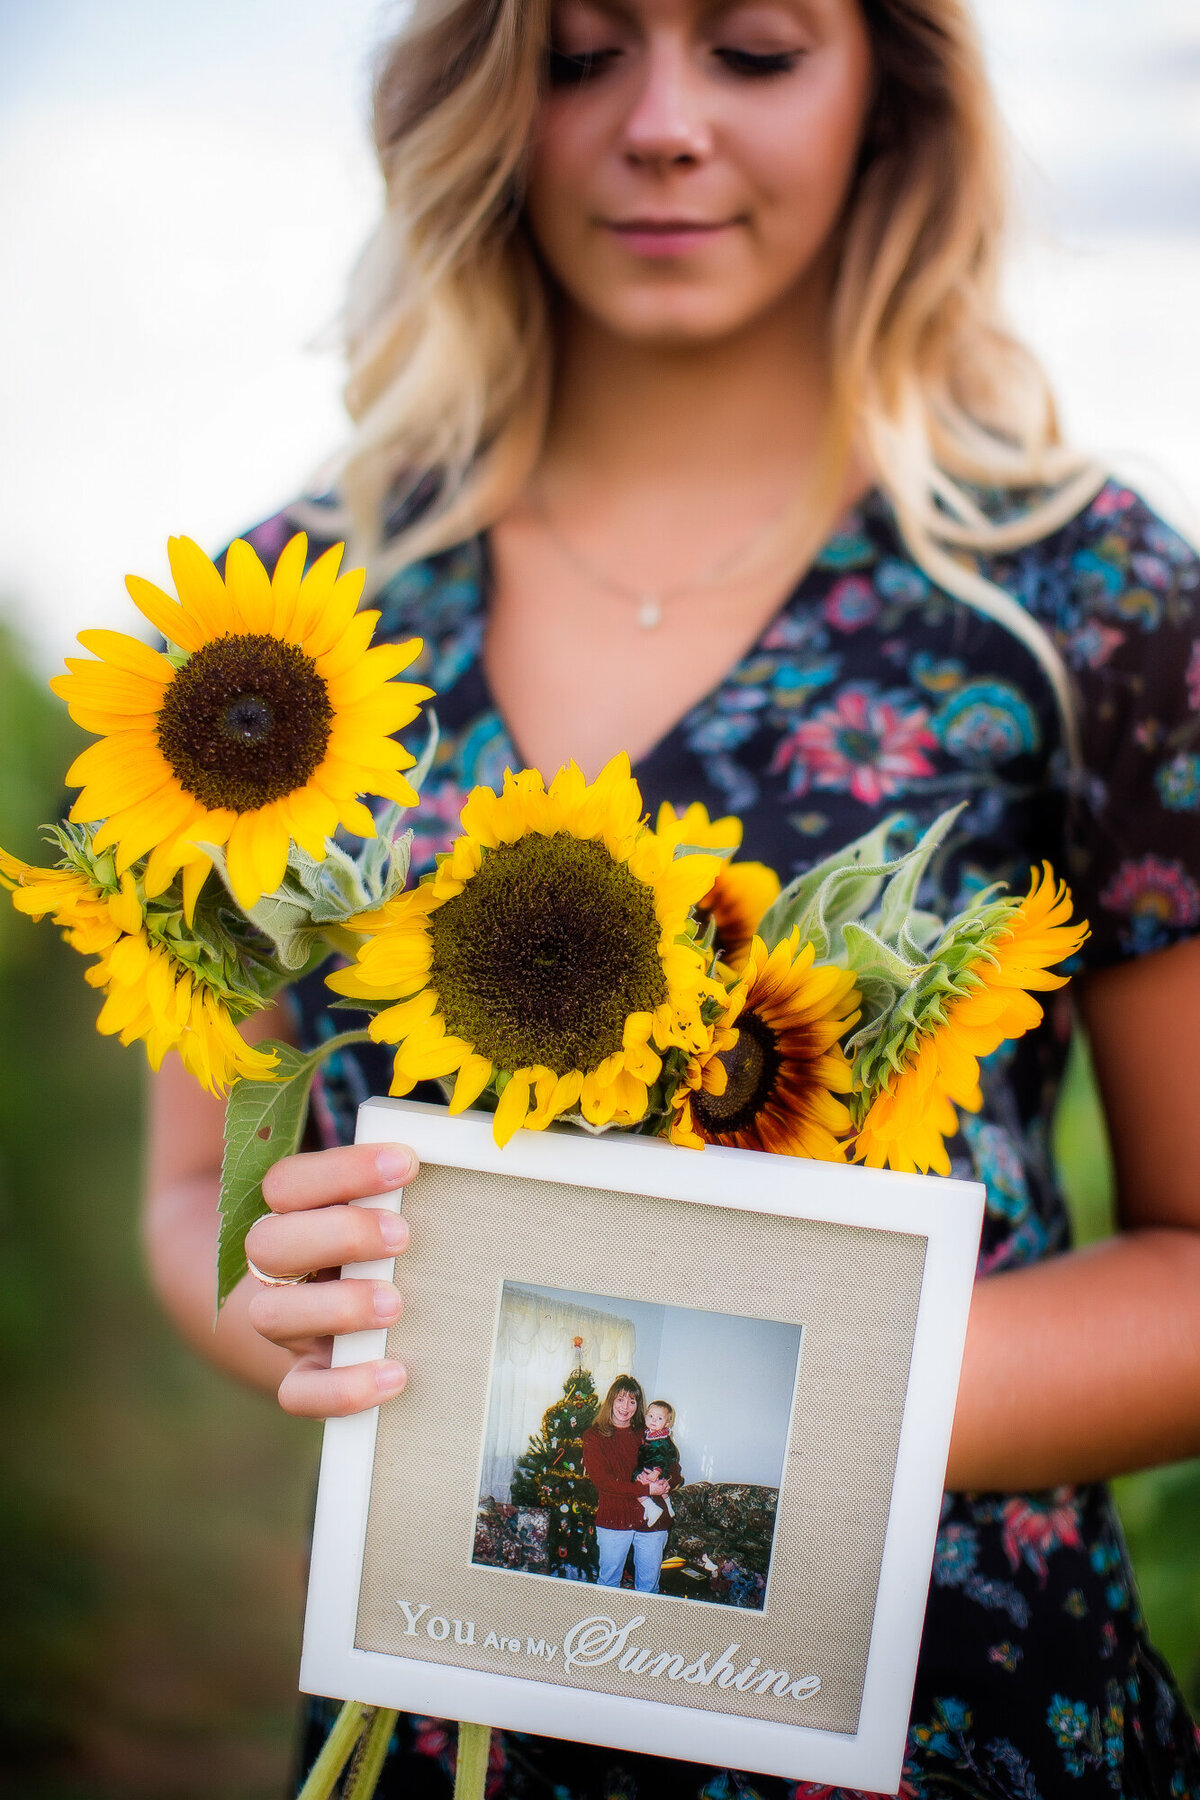 Senior girl holding sunflowers and an image of herself with her mom that passed when she was young